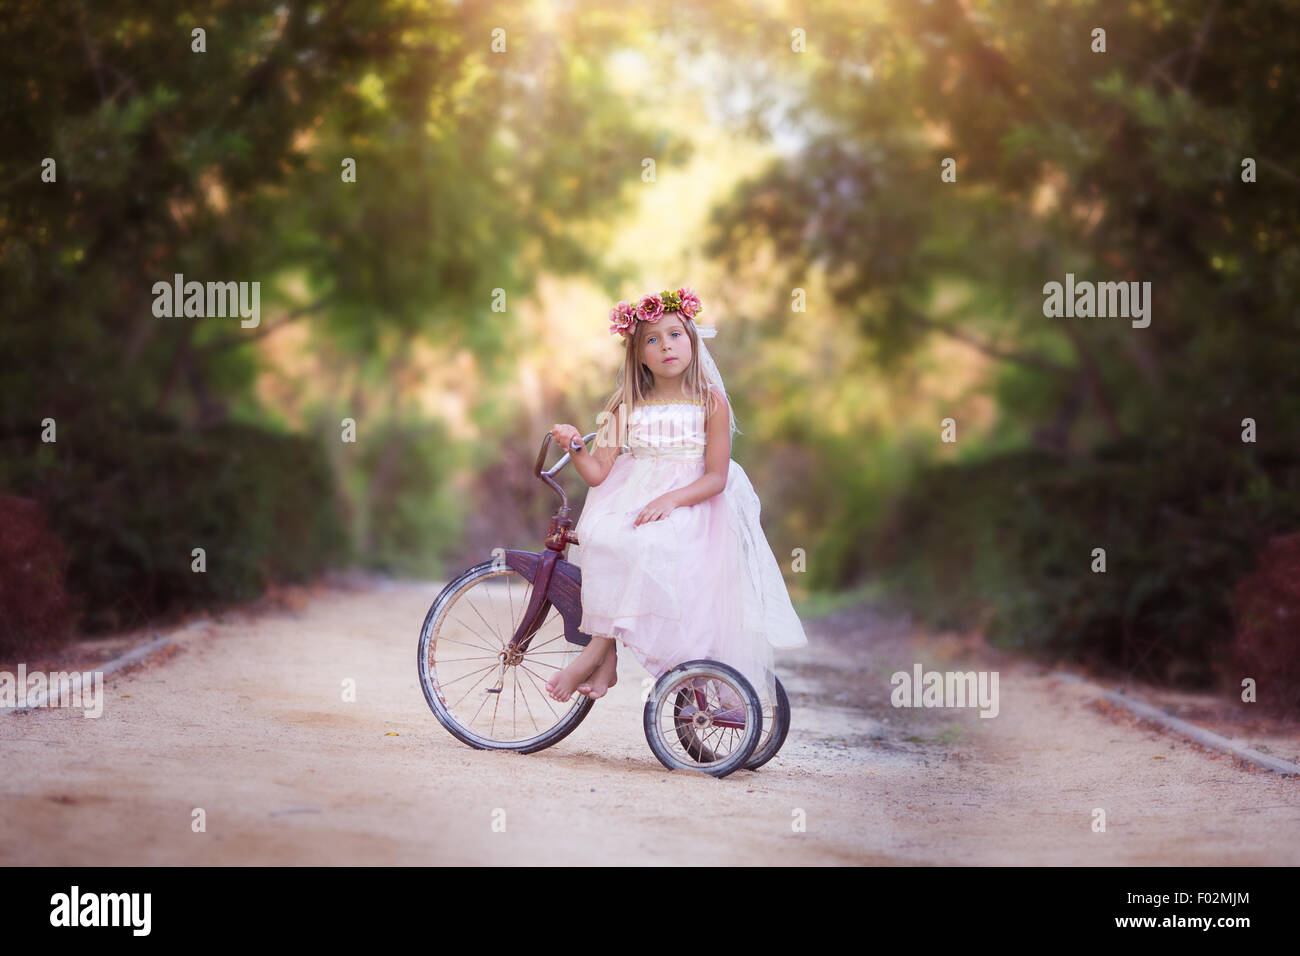 Girl sitting on a vintage bike on a country road, California, USA Stock Photo